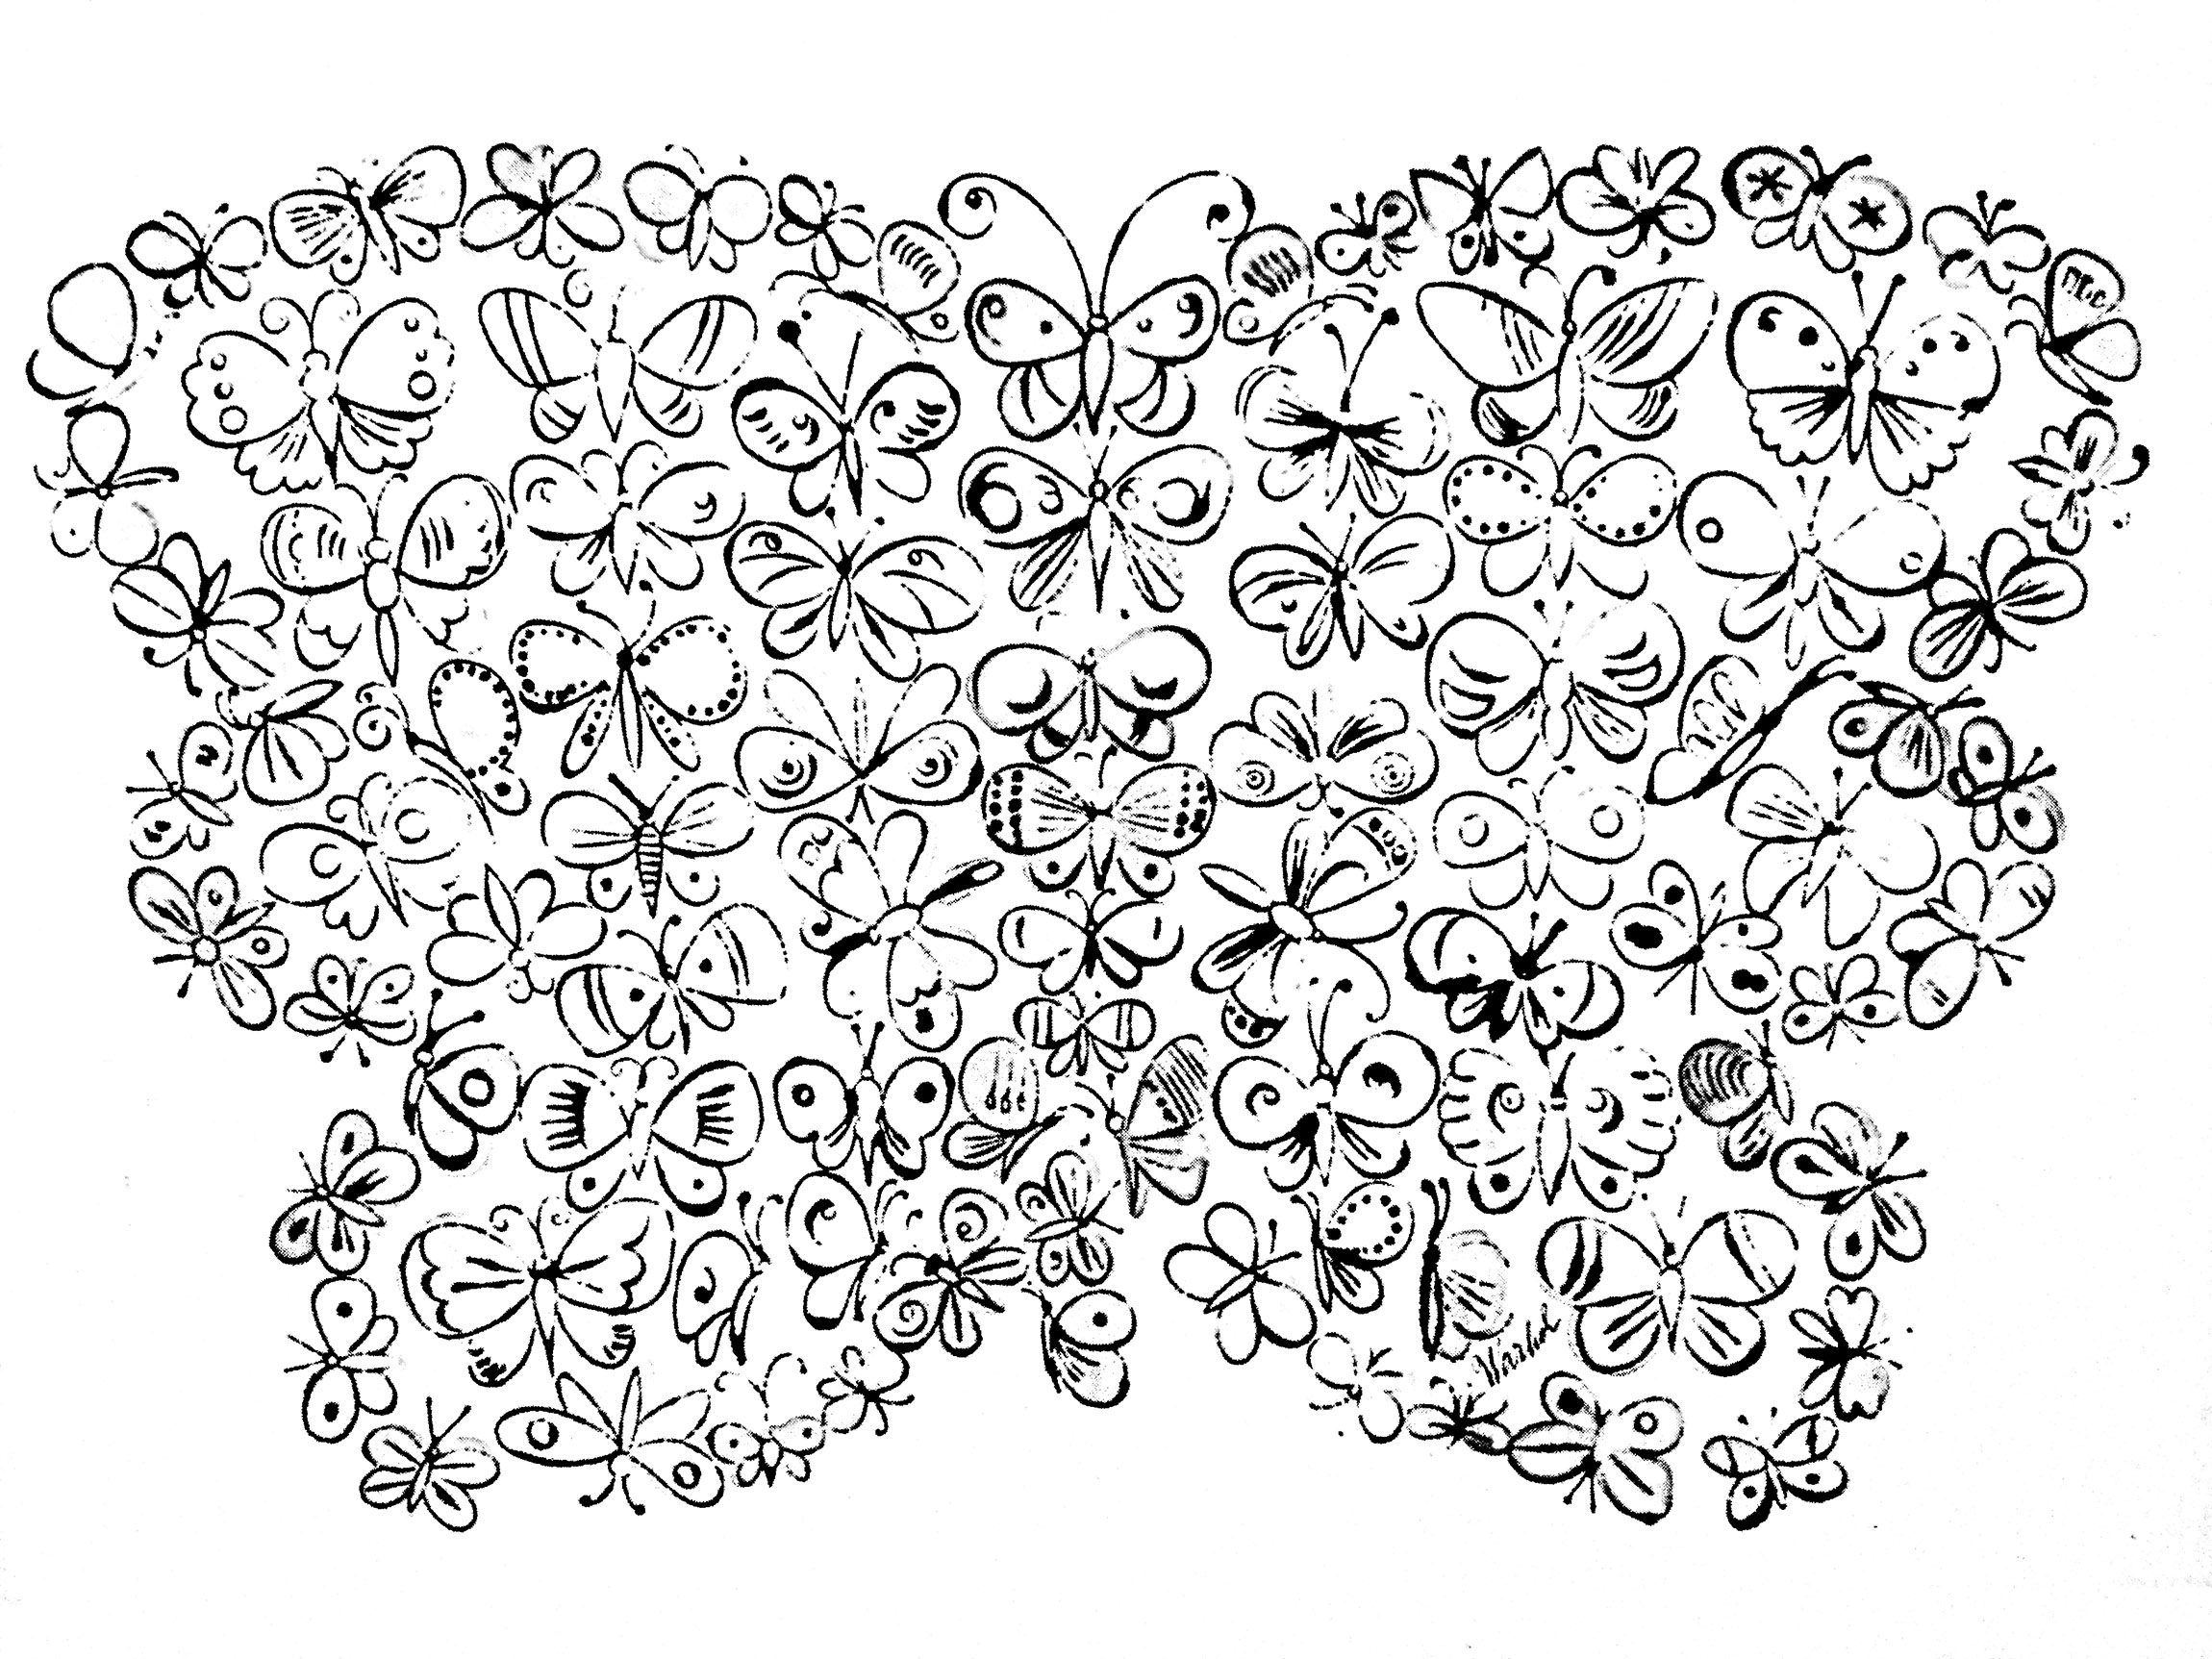 Coloring page warhol butterflies